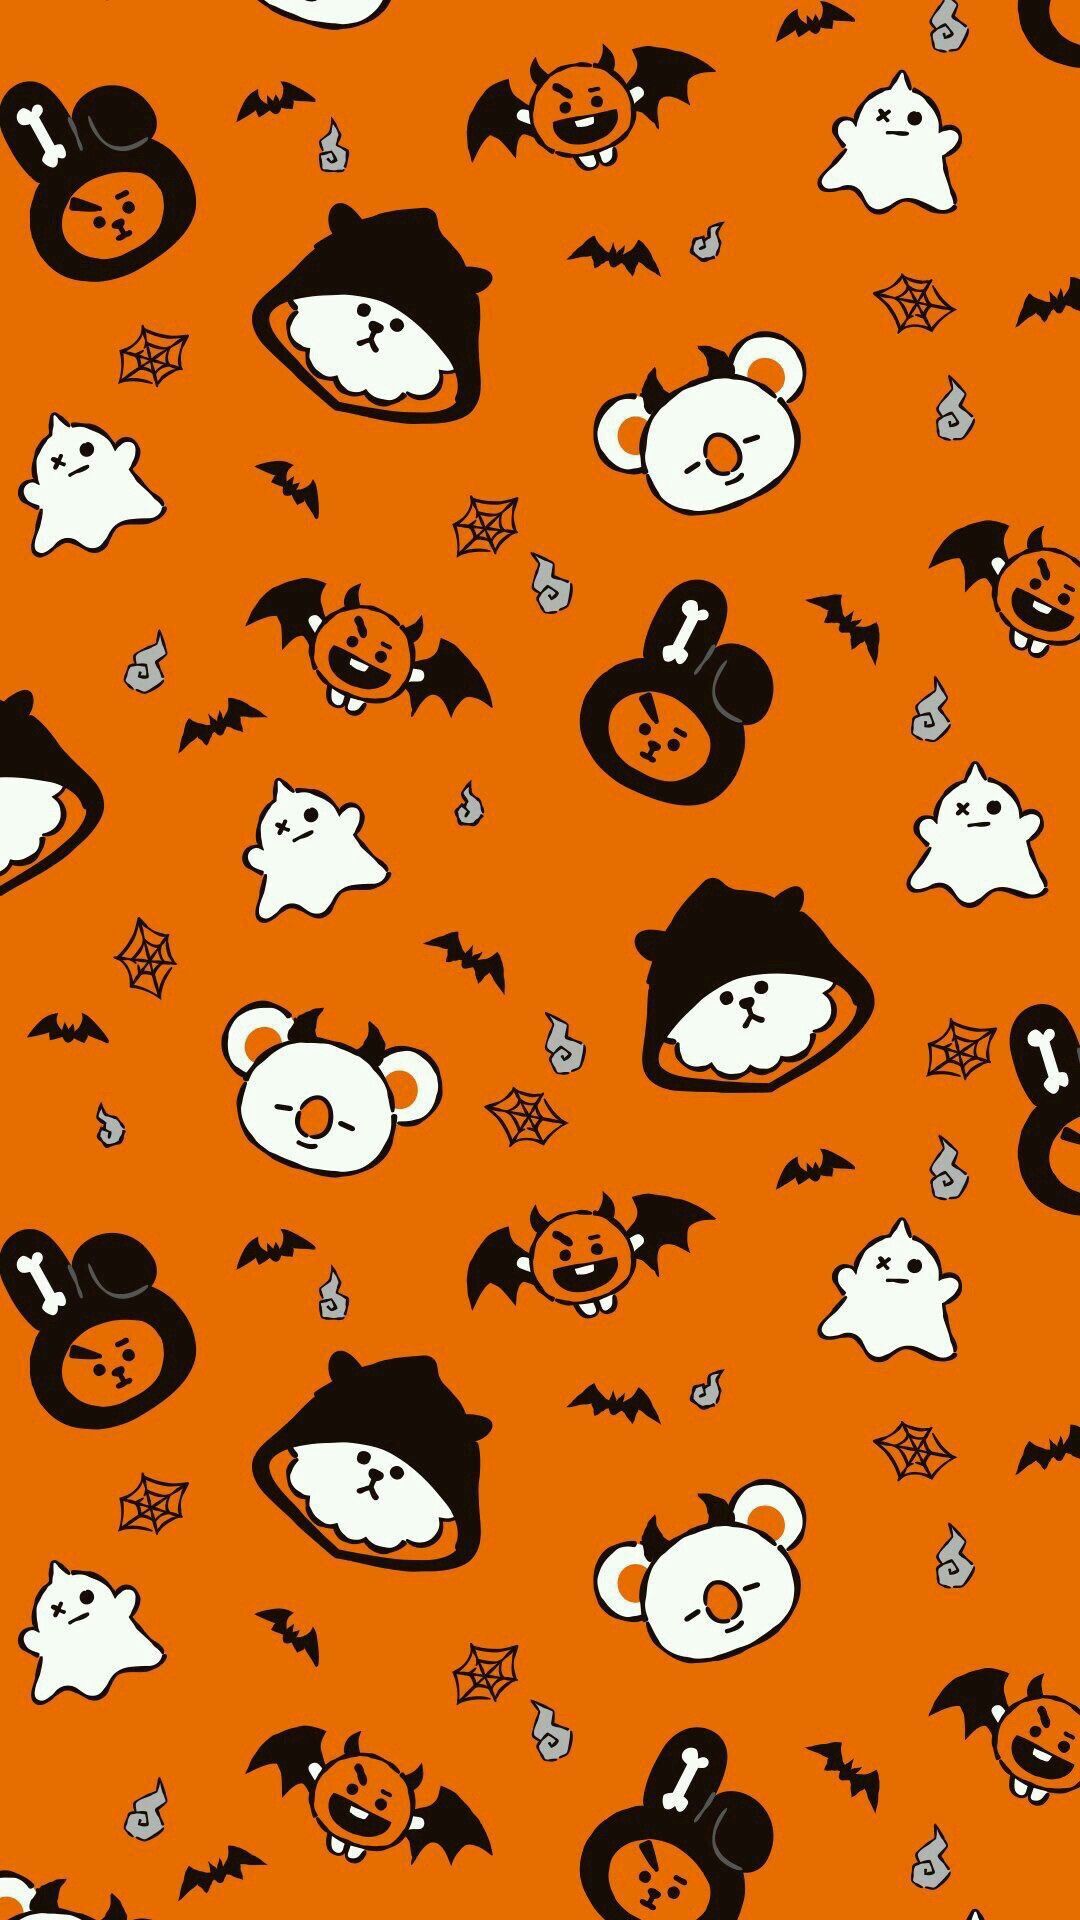 Scare Yourself with Halloween Aesthetic Wallpaper